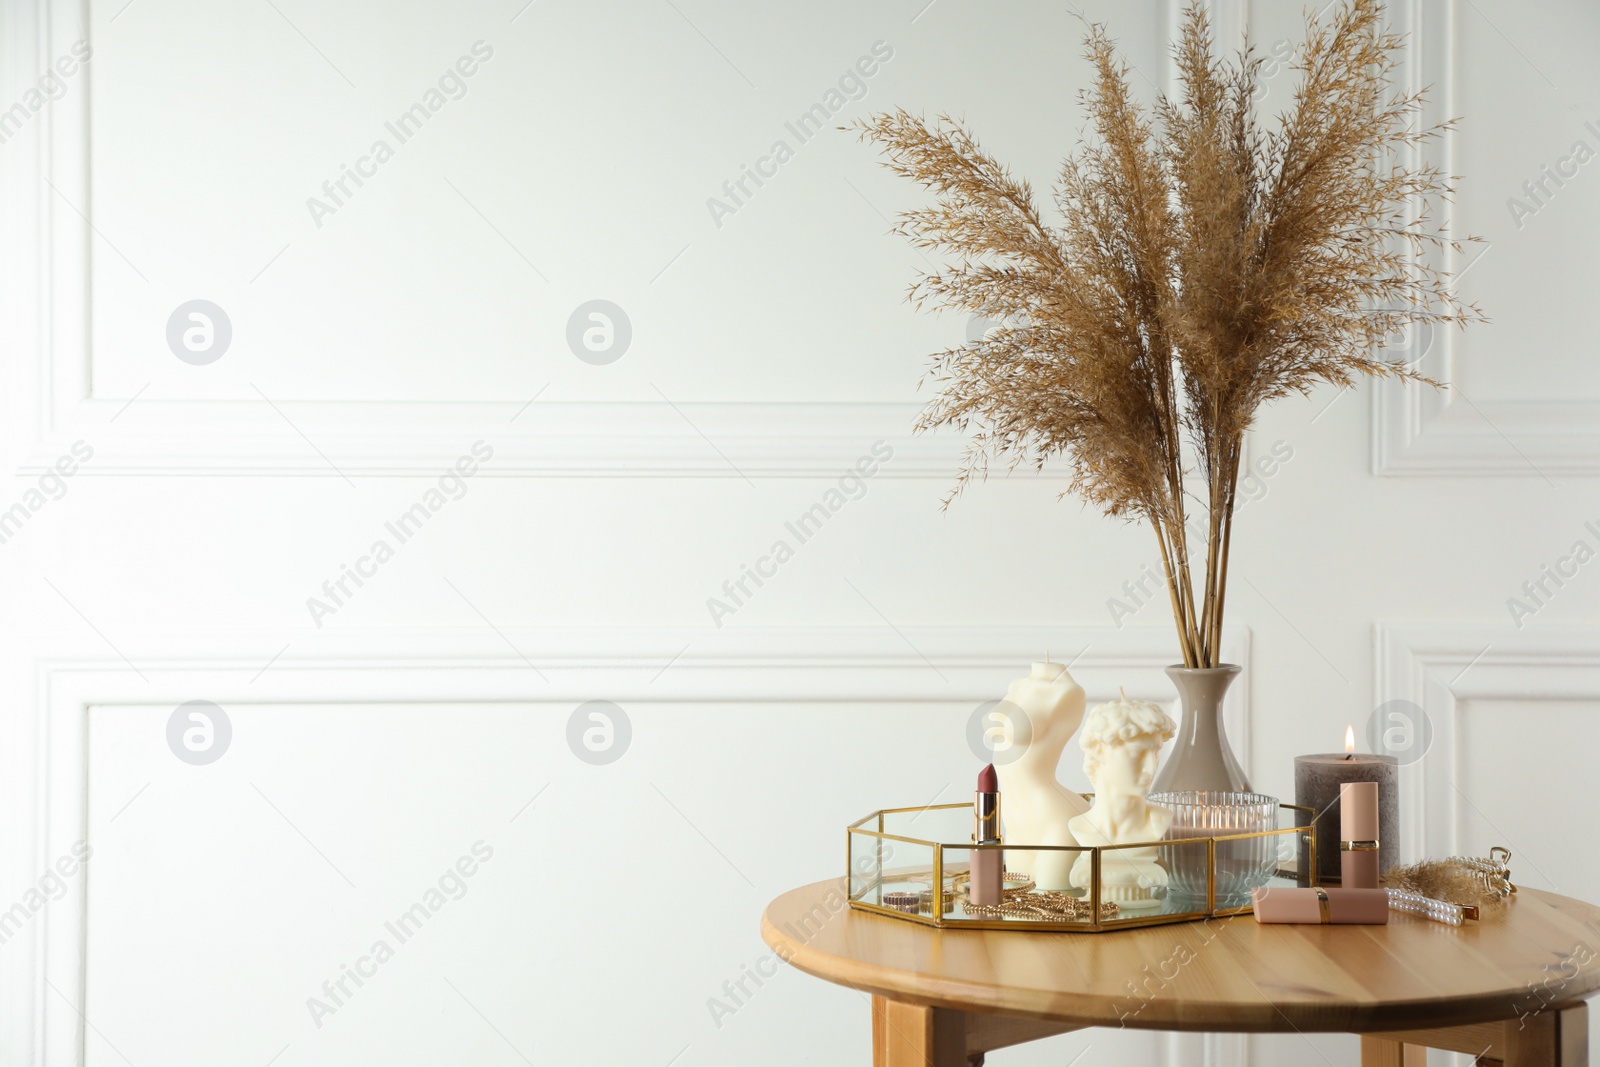 Photo of David bust and female body shaped candles on wooden table, space for text. Stylish decor